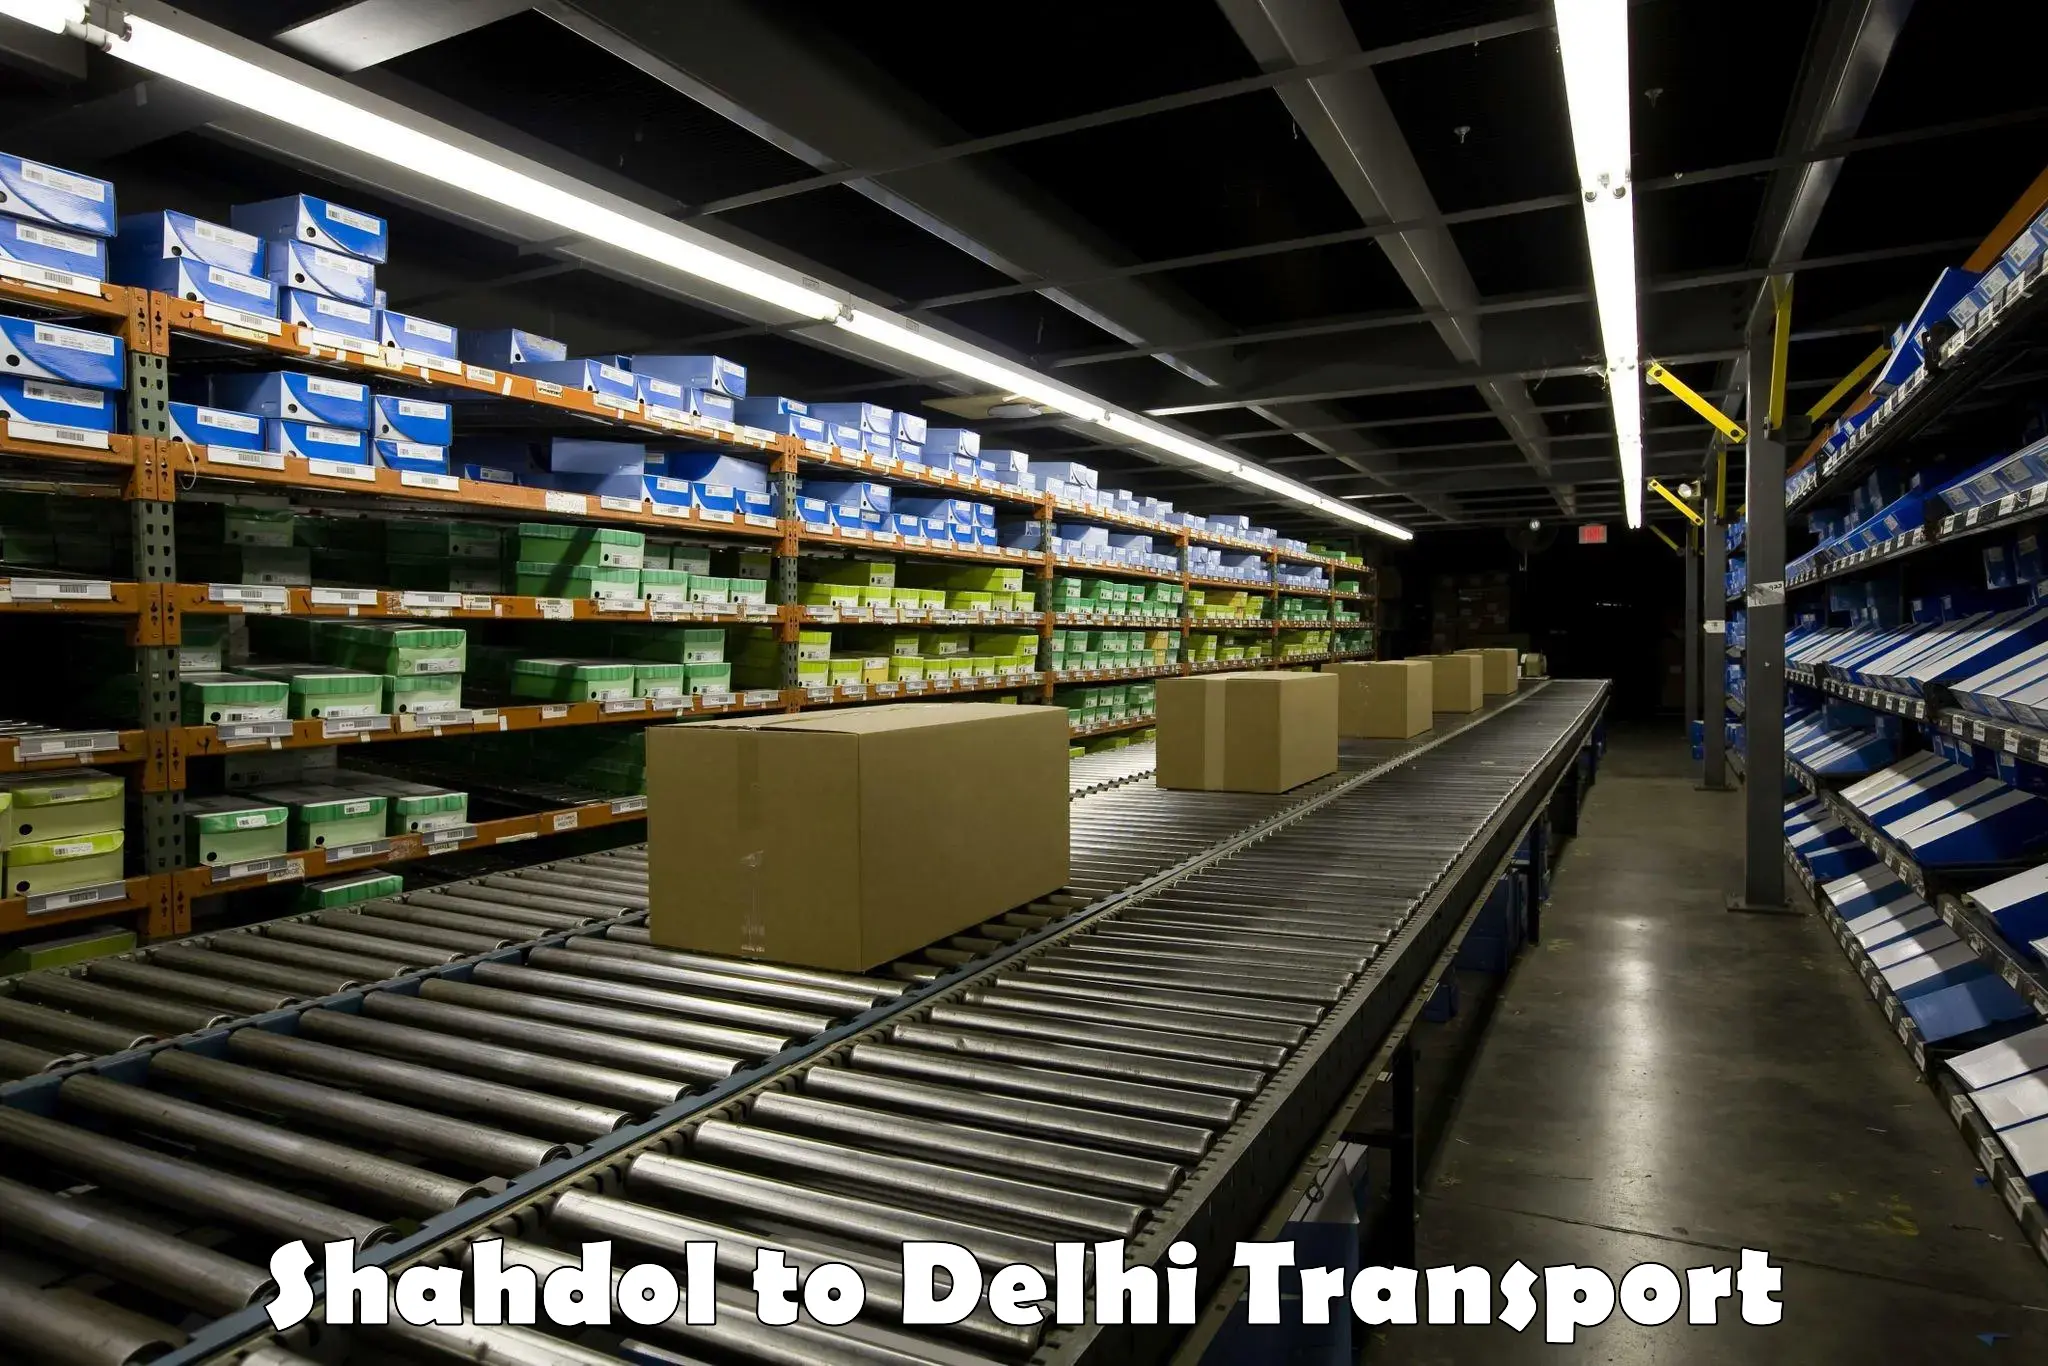 Commercial transport service Shahdol to East Delhi